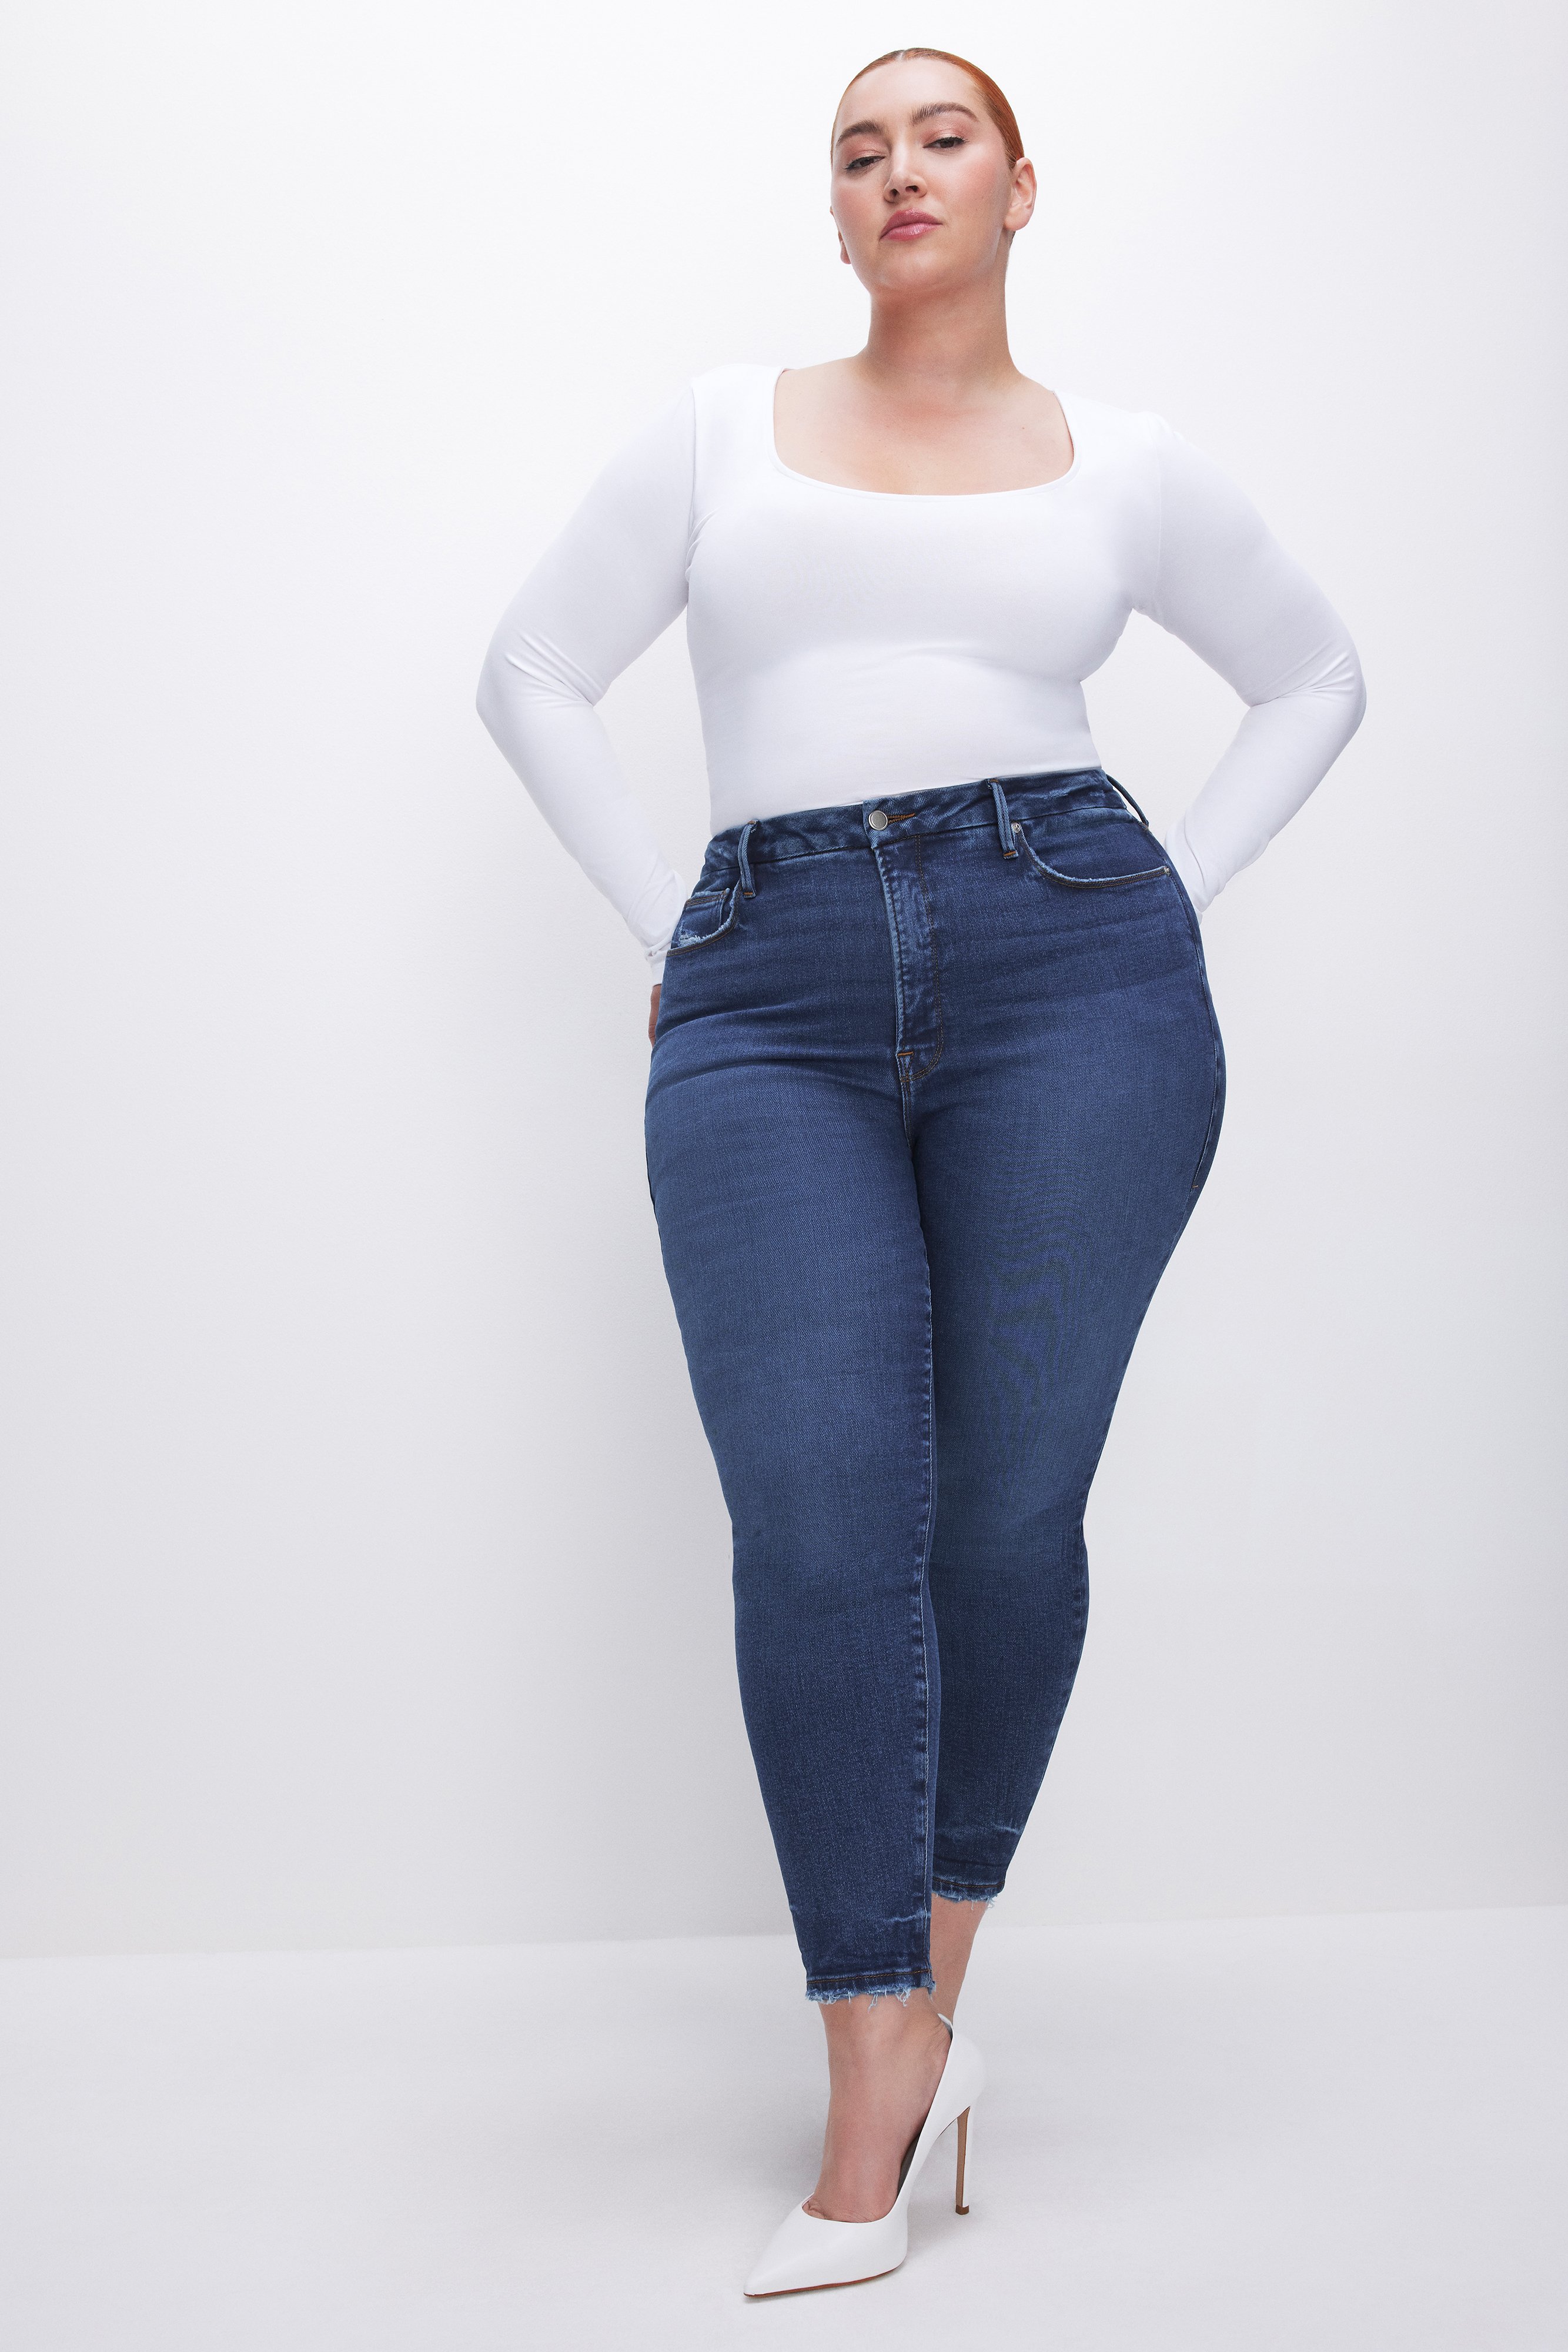 Styled with GOOD LEGS SKINNY CROPPED LIGHT COMPRESSION JEANS | INDIGO563